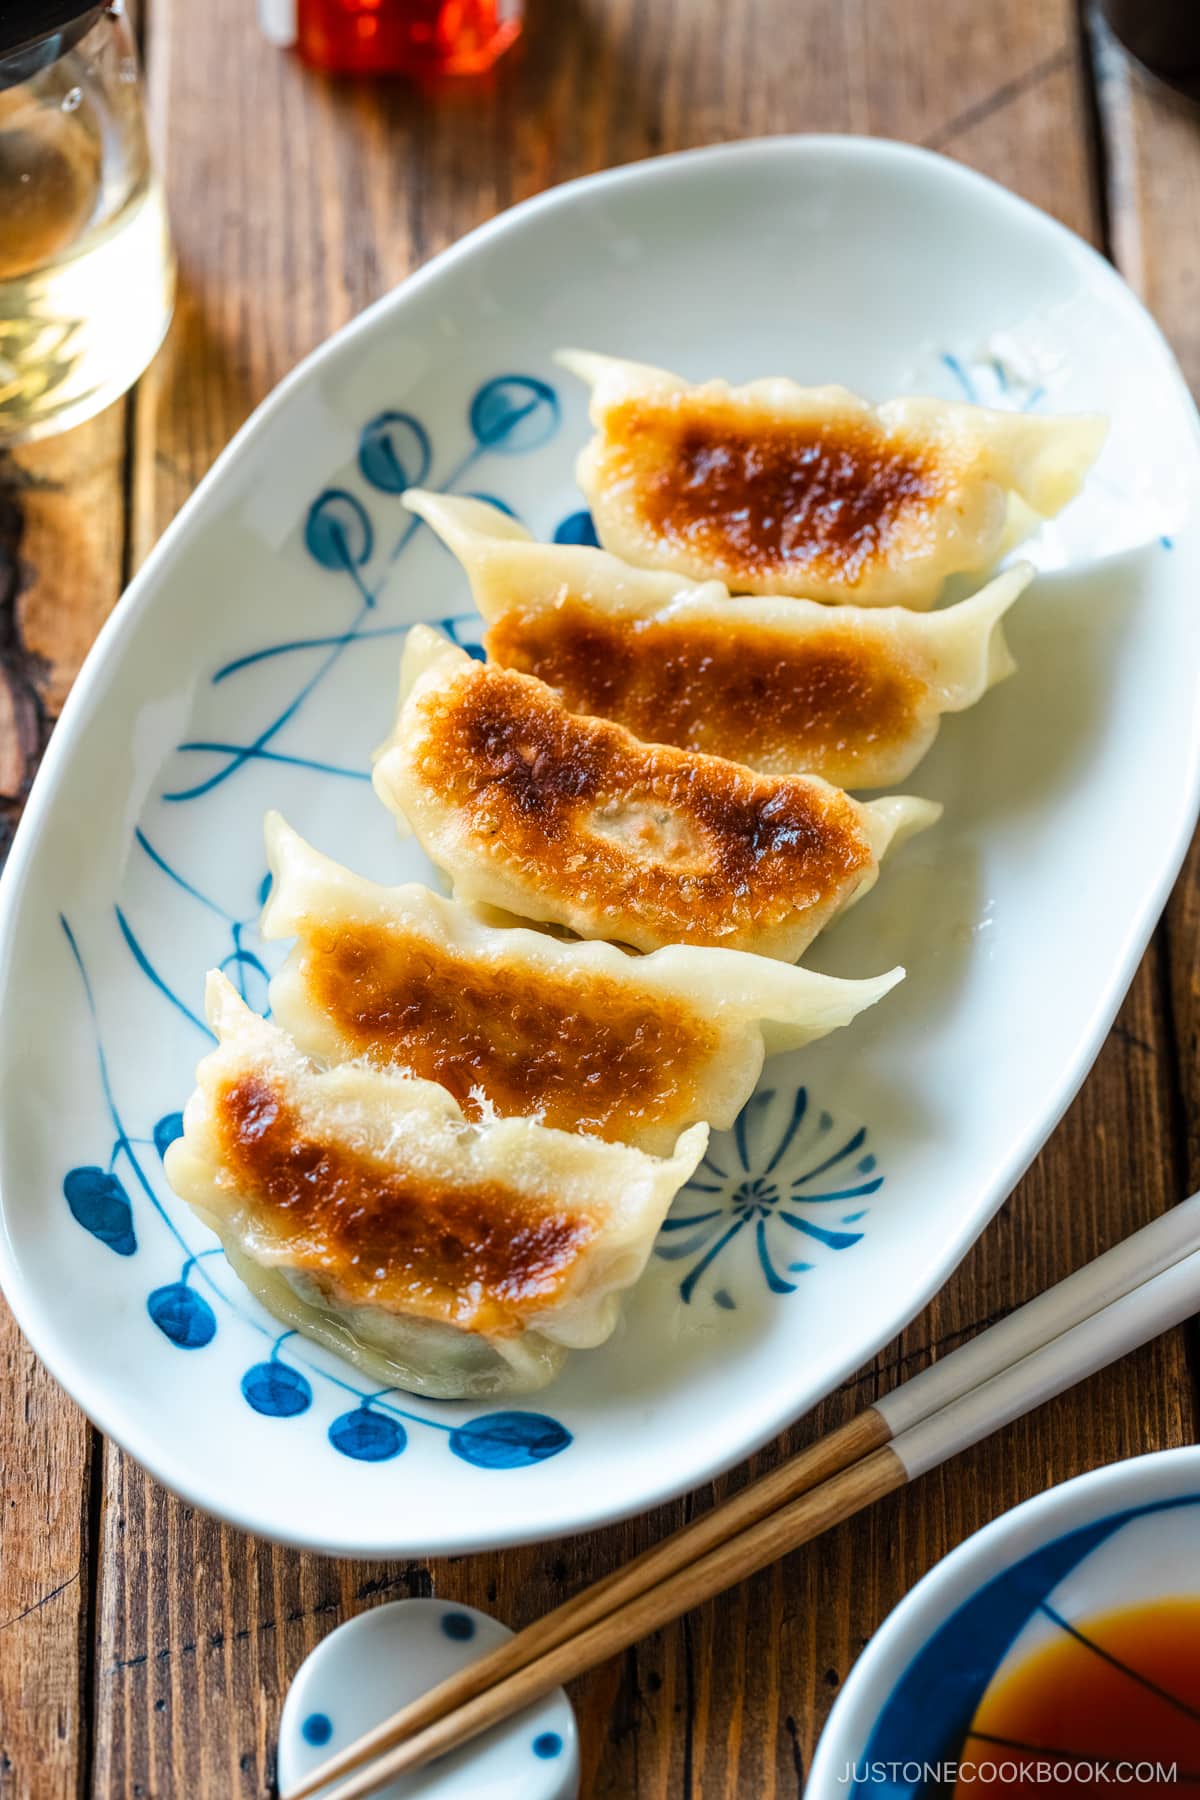 An oval plate containing gyoza (Japanese potstickers or pan-fried dumplings) with a small plate of dipping sauce made with soy sauce, vinegar, and Japanese chili oil.